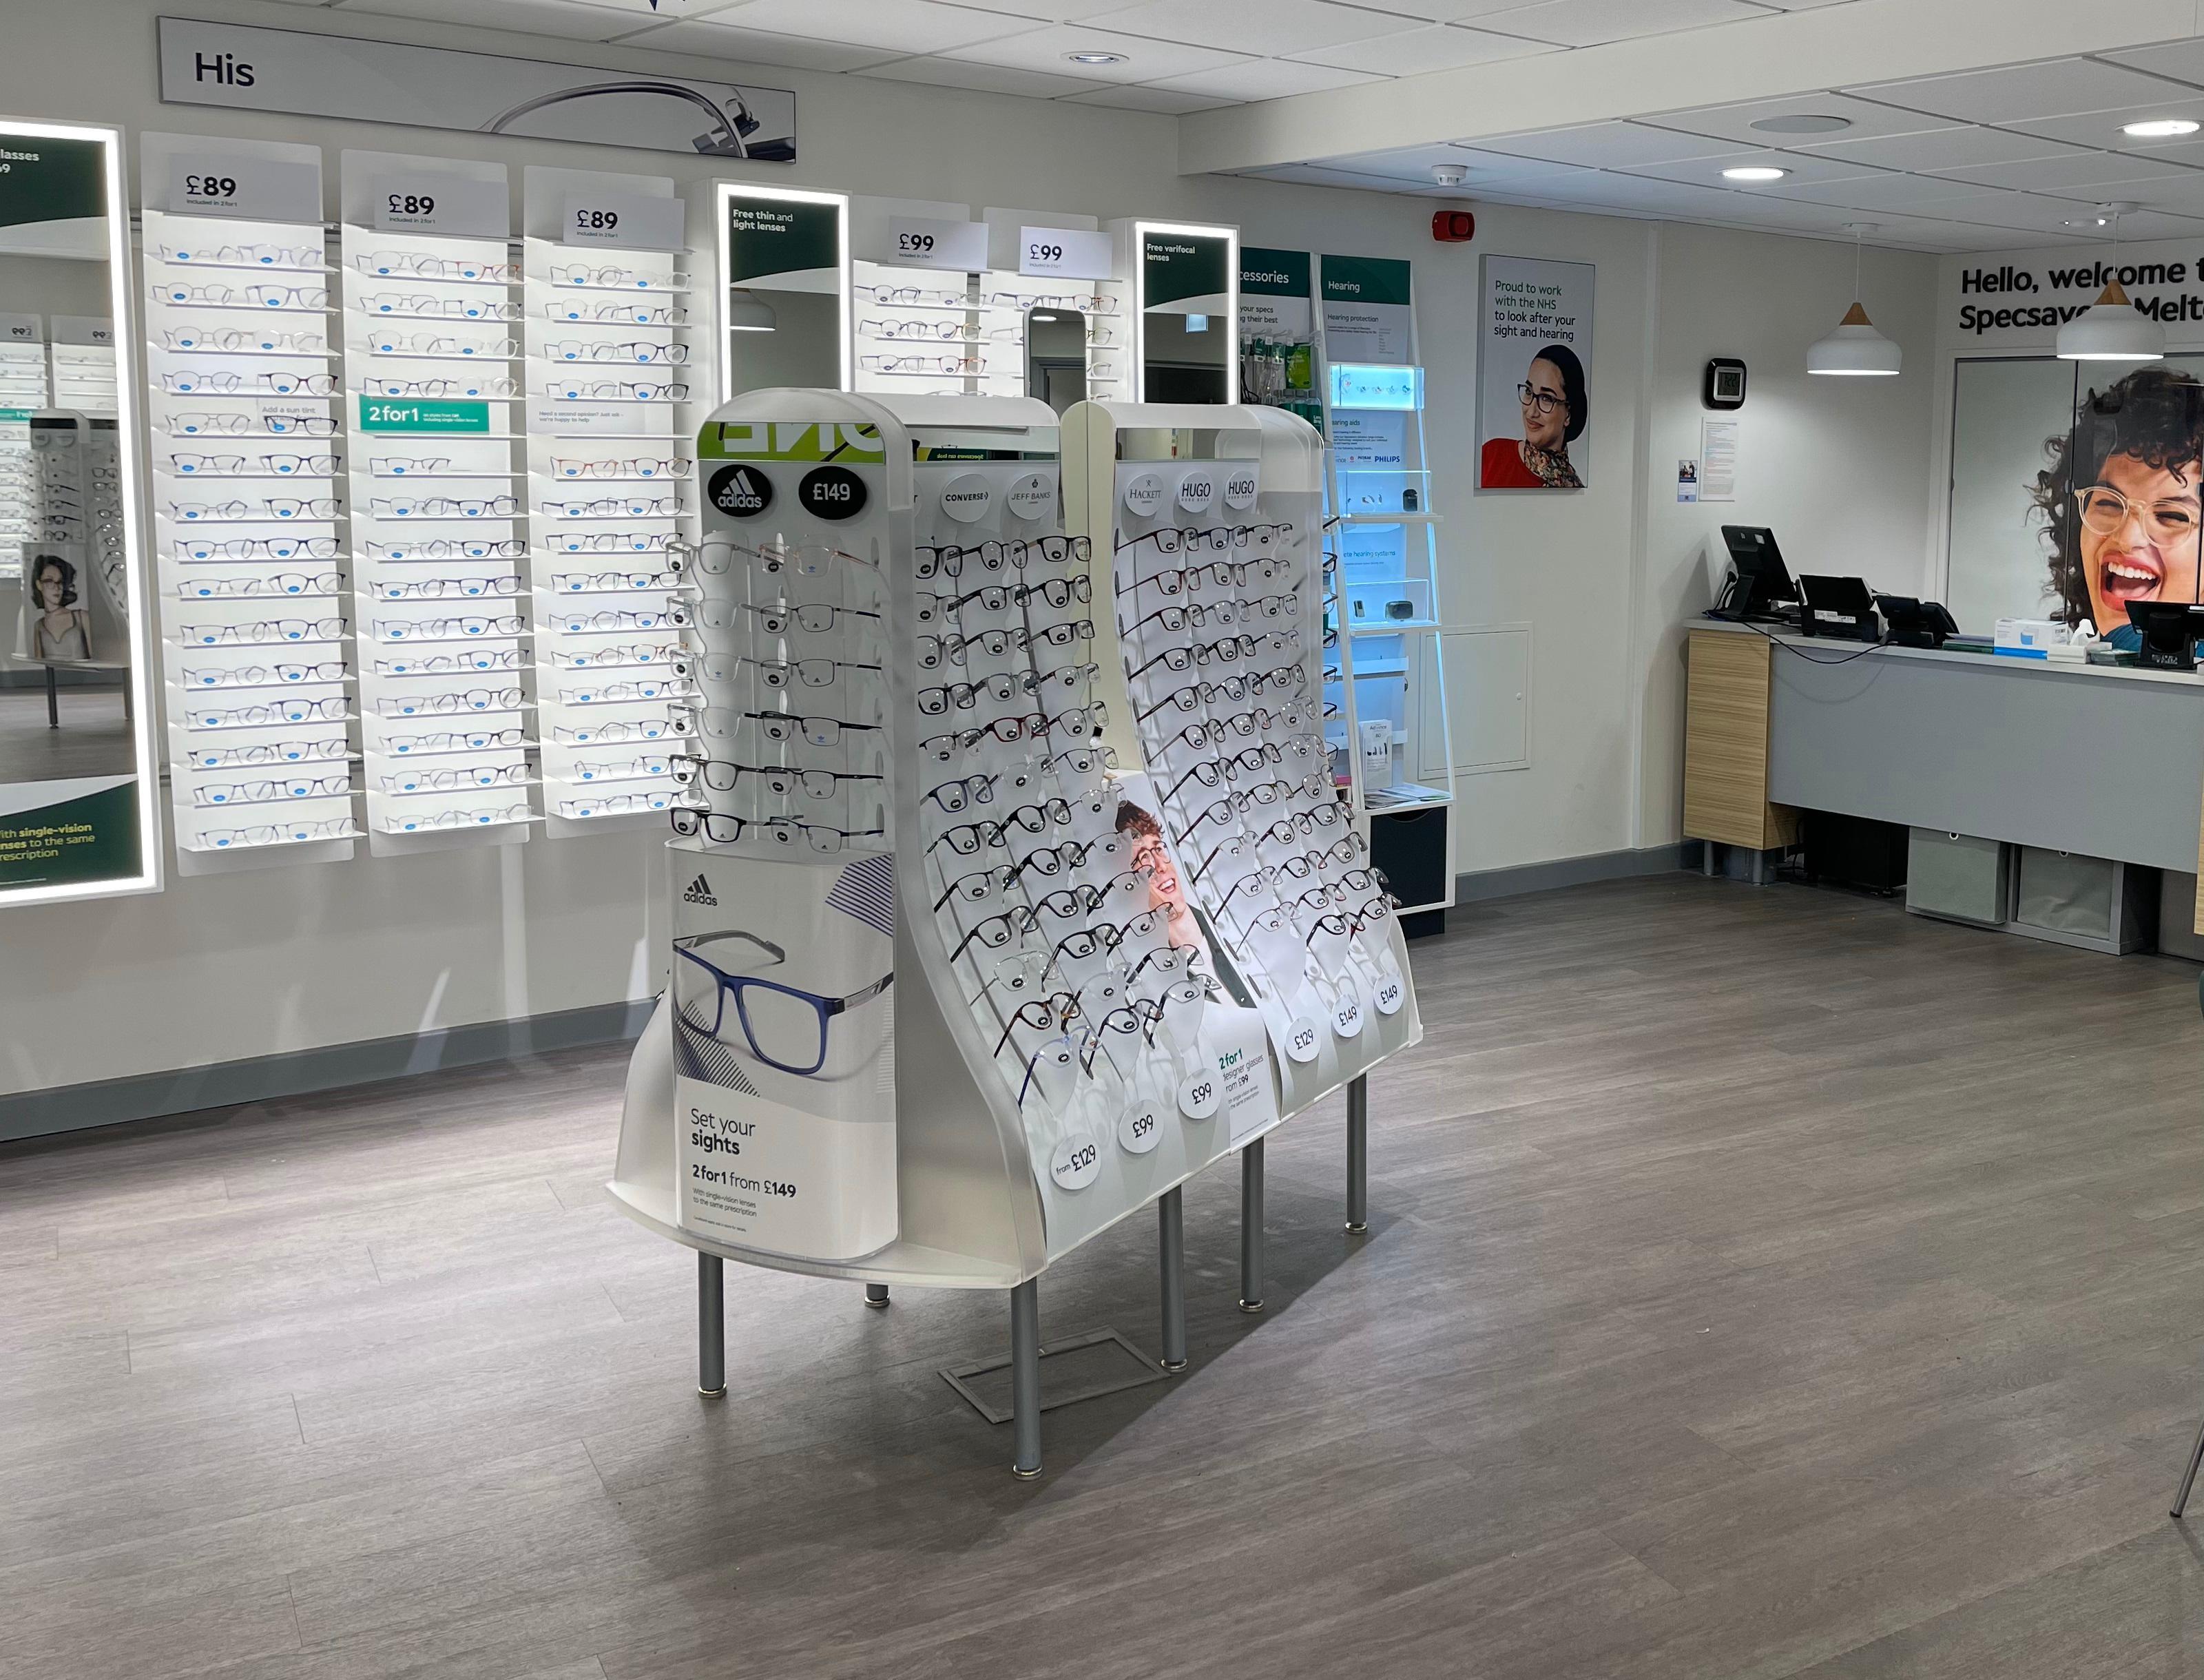 Specsavers Opticians and Audiologists - Melton Mowbray Specsavers Opticians and Audiologists - Melton Mowbray Melton Mowbray 01664 503555